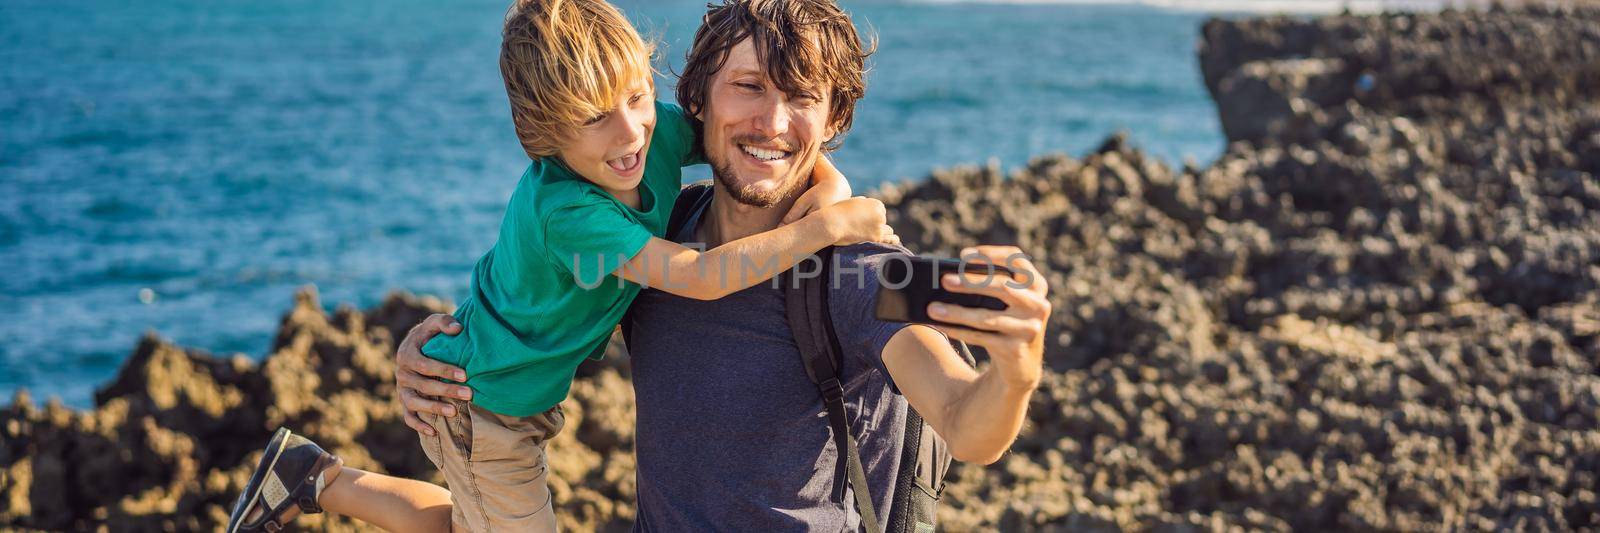 Father and son travelers on amazing Nusadua, Waterbloom Fountain, Bali Island Indonesia. Traveling with kids concept BANNER, LONG FORMAT by galitskaya